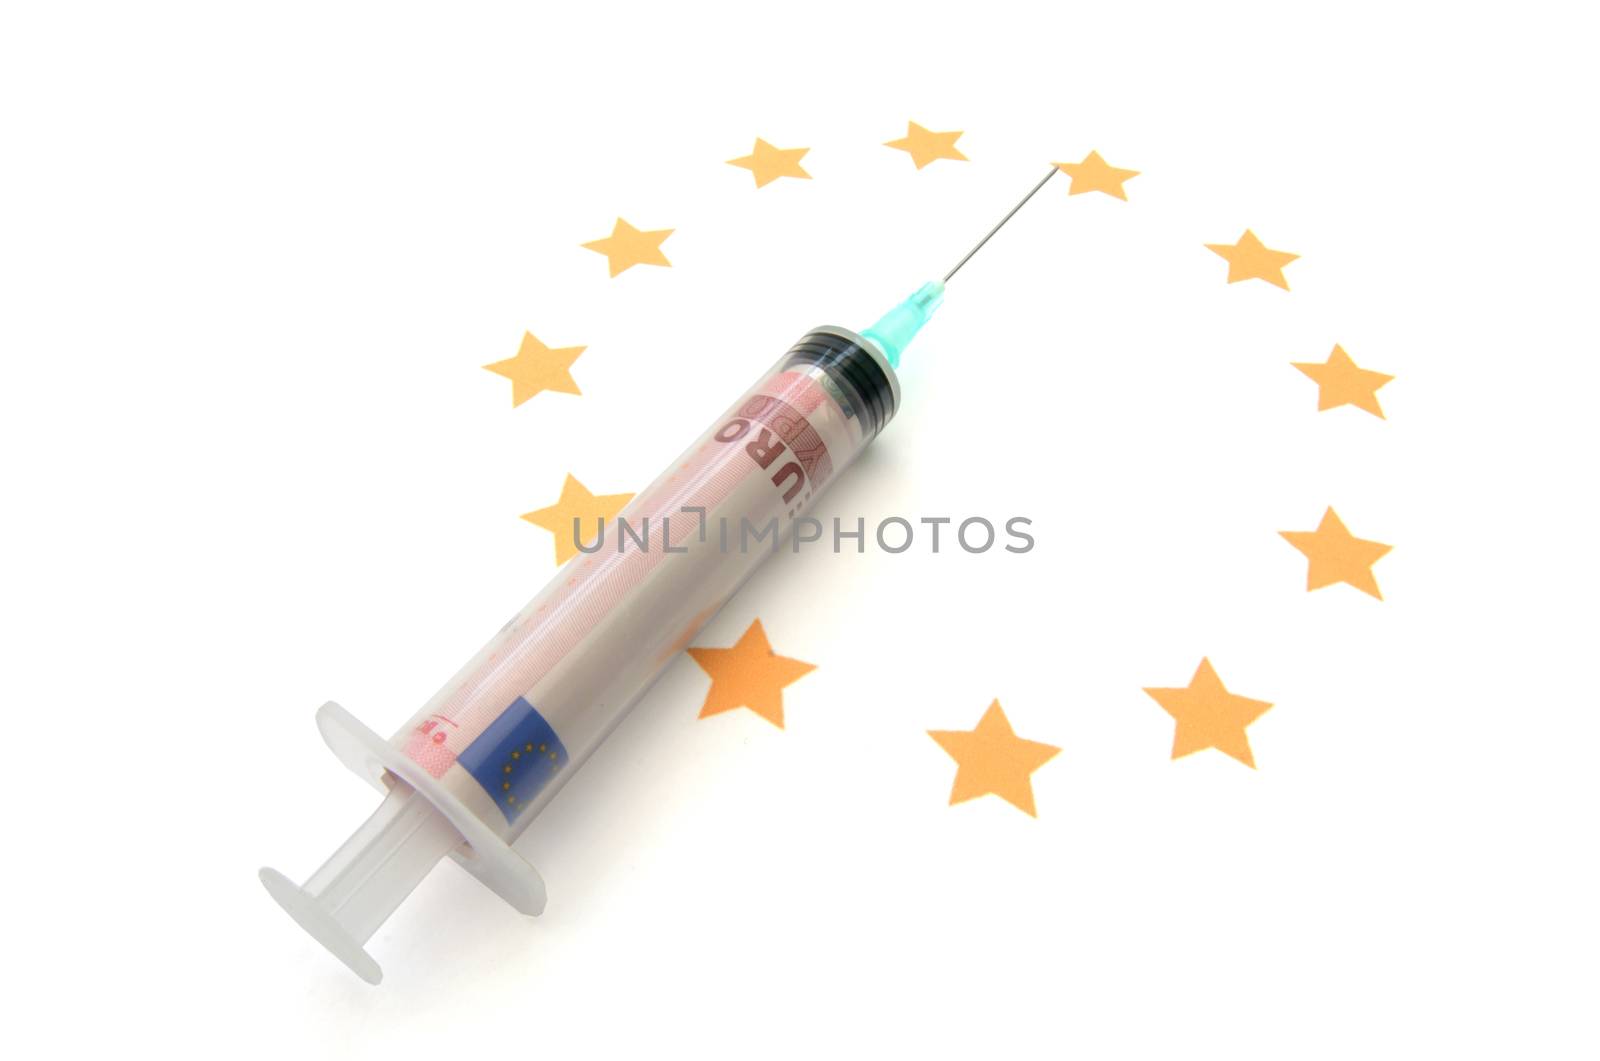 Injection needle containing euro banknotes on the euro stars symbolising a financial cash injection or bailout concept 